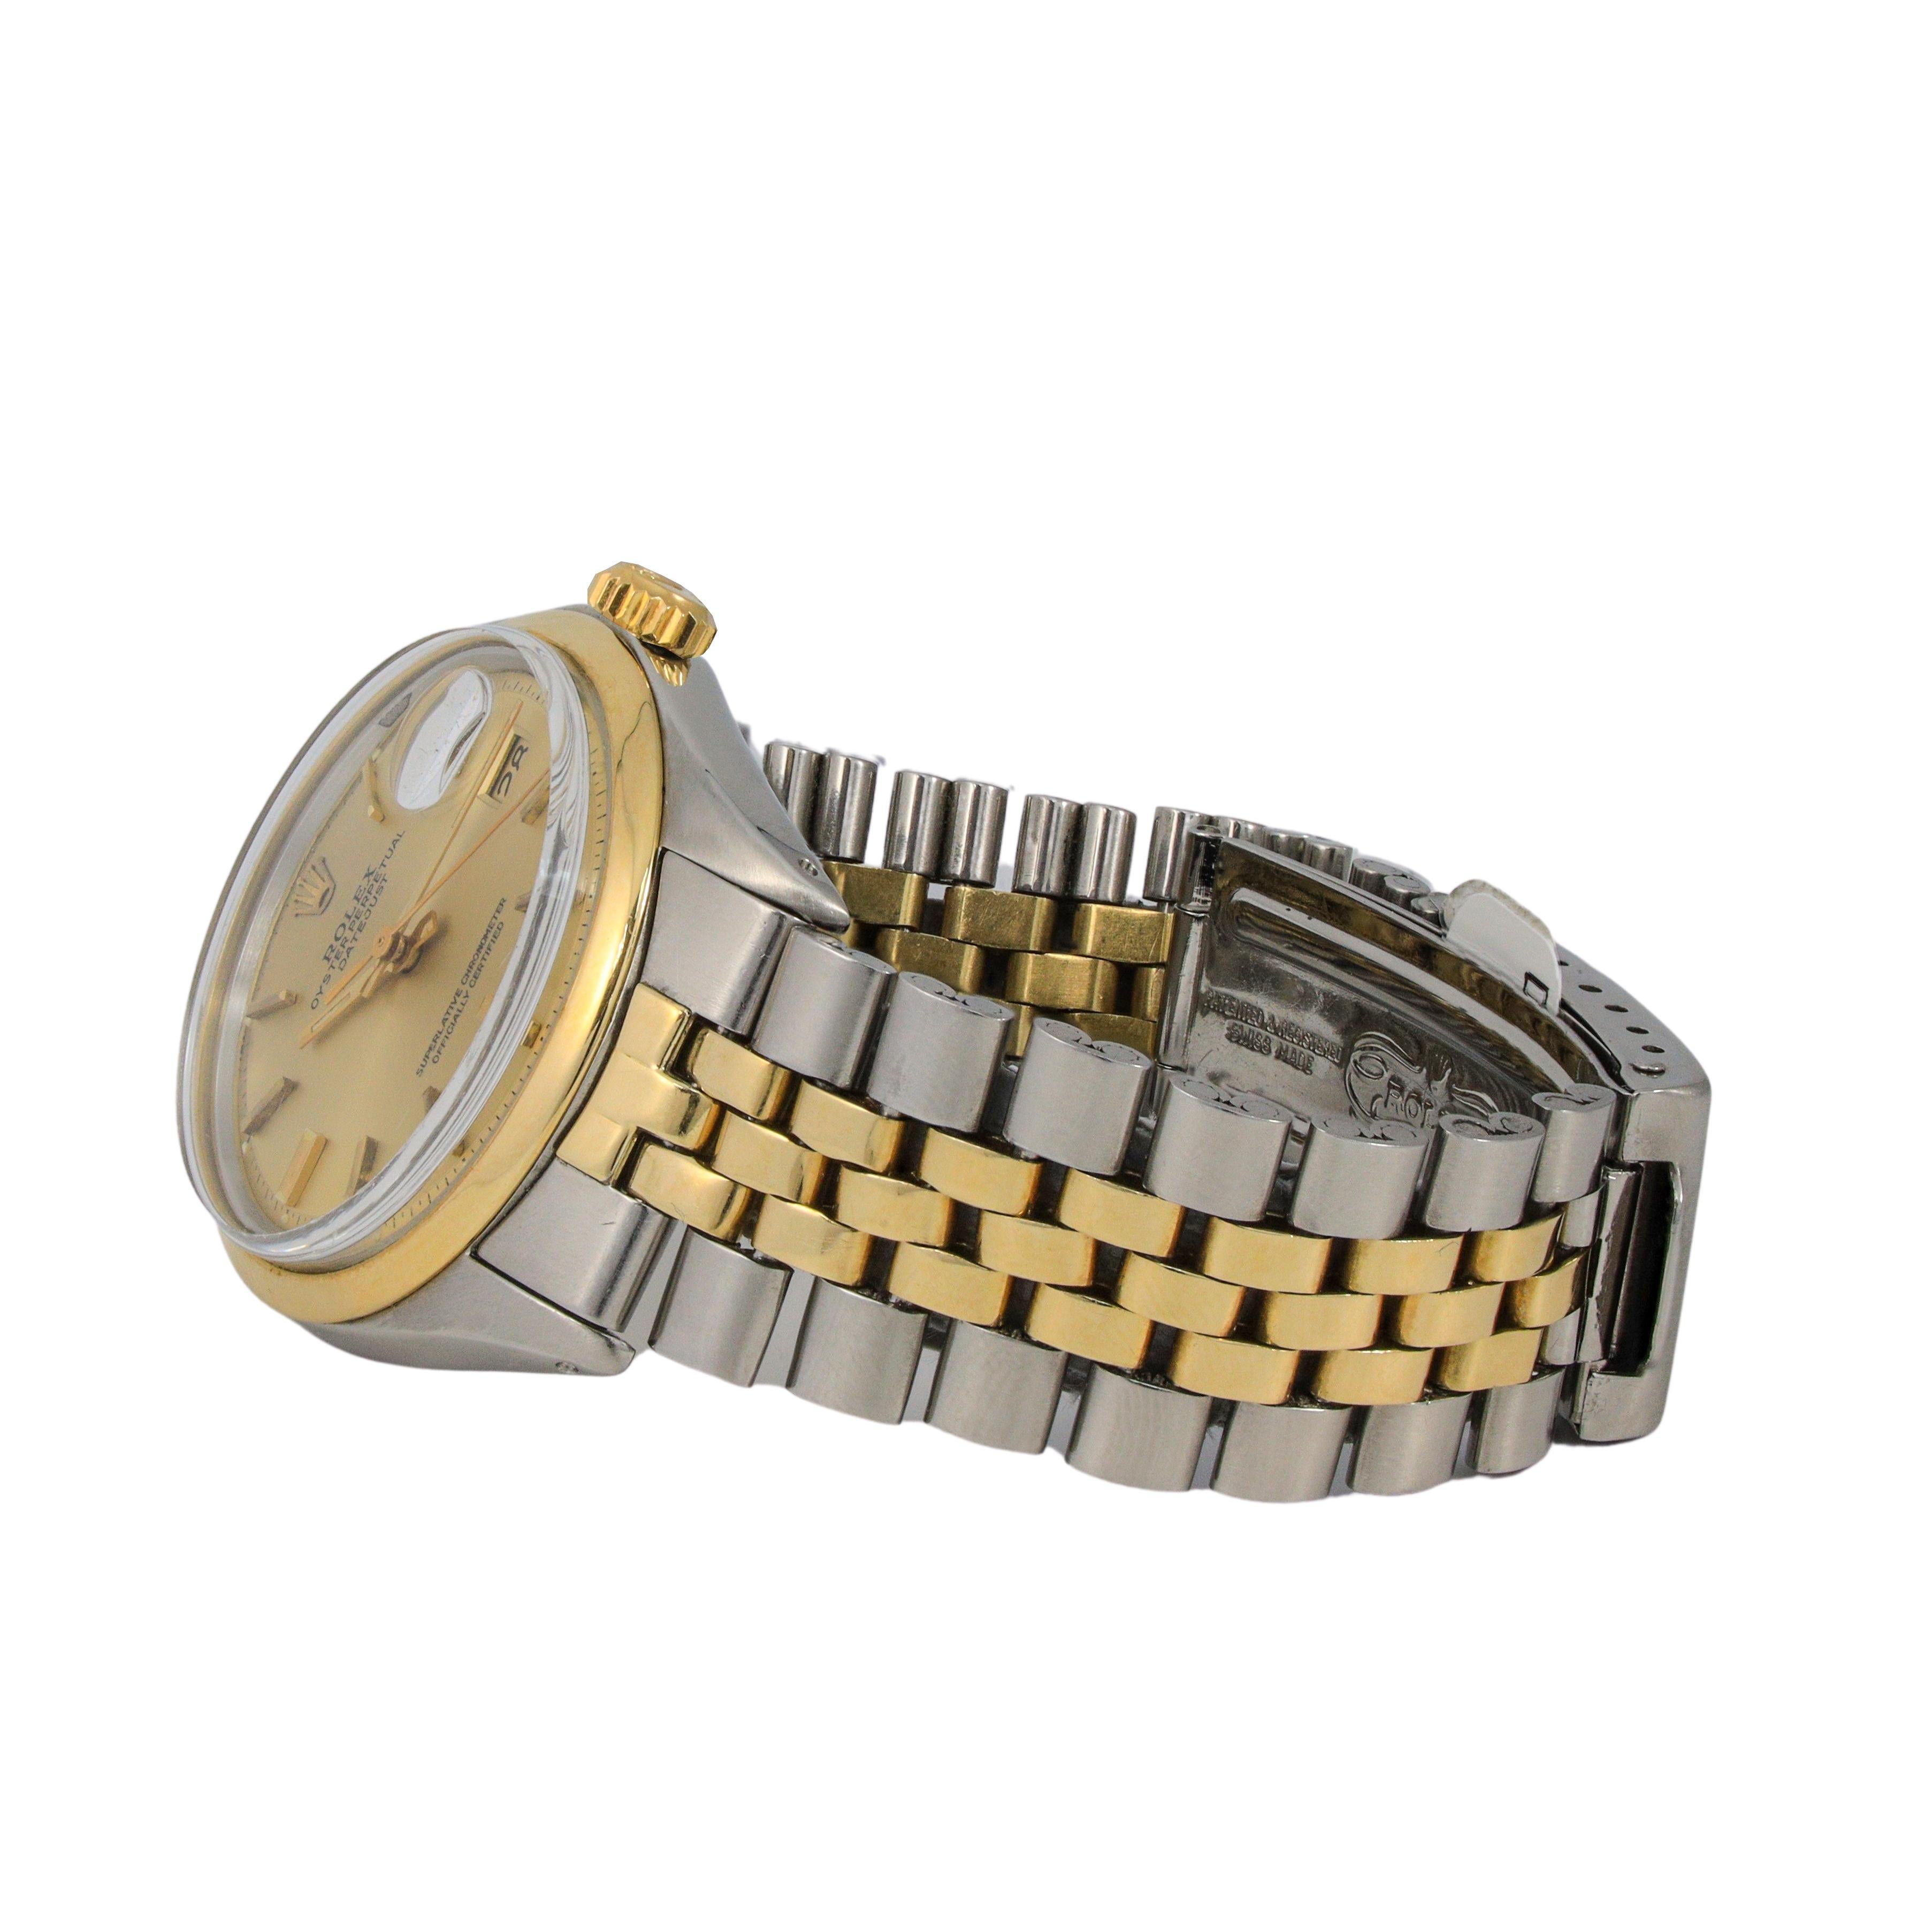 Rolex Datejust 18kt Yellow Gold/Stainless Steel Mens Watch In Excellent Condition For Sale In New York, NY